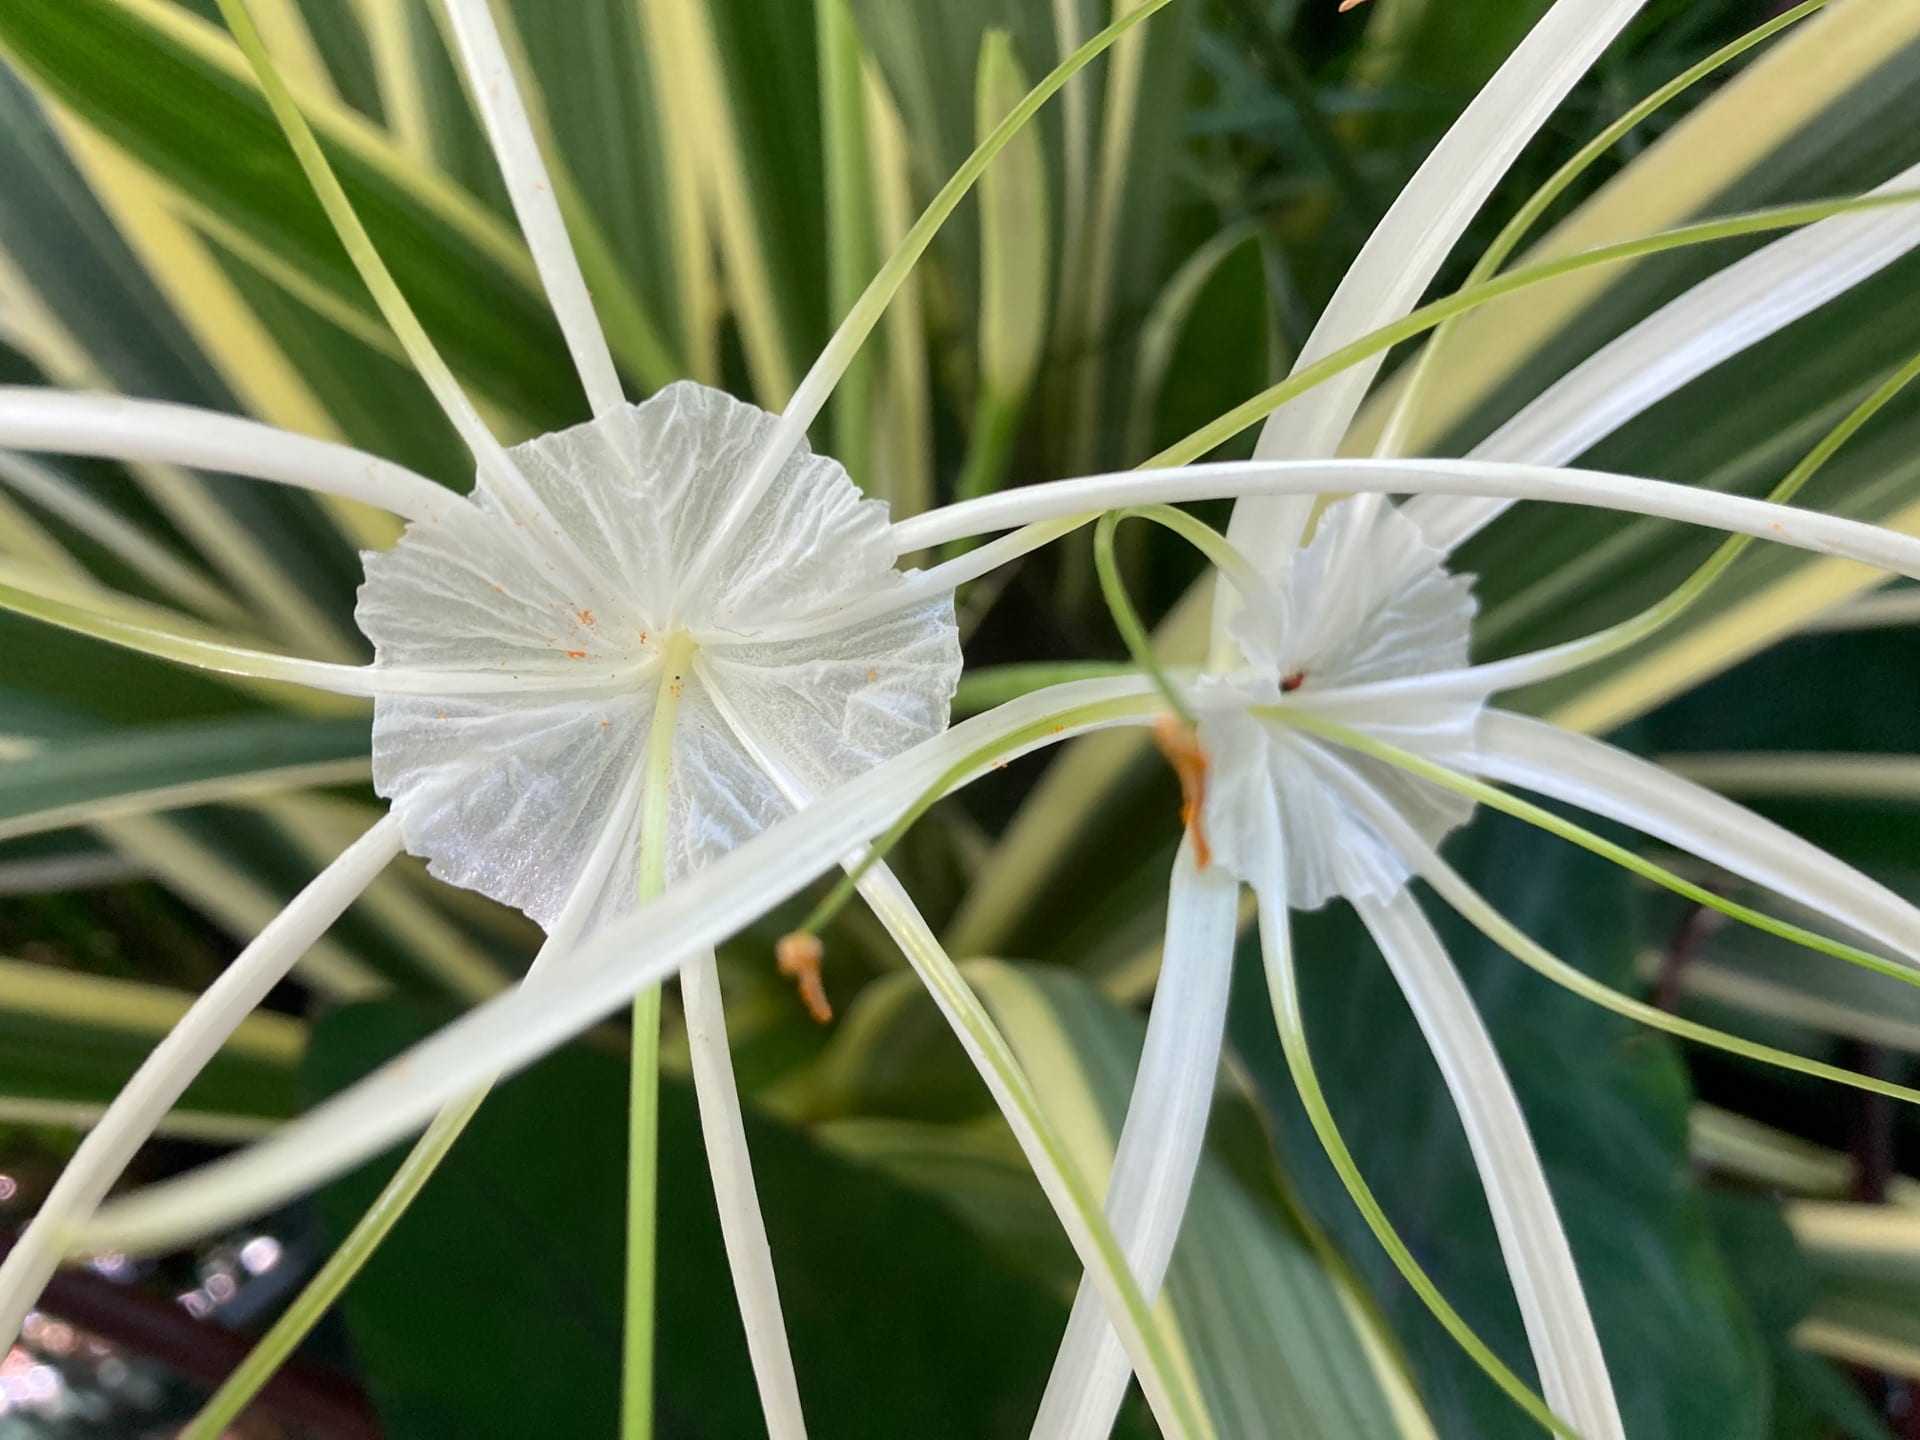 The Caribbean spider lily, Hymenocallis caribaea, 'Variegata' is a bulbous perennial that has adapted to be able to grow completely submerged in water.